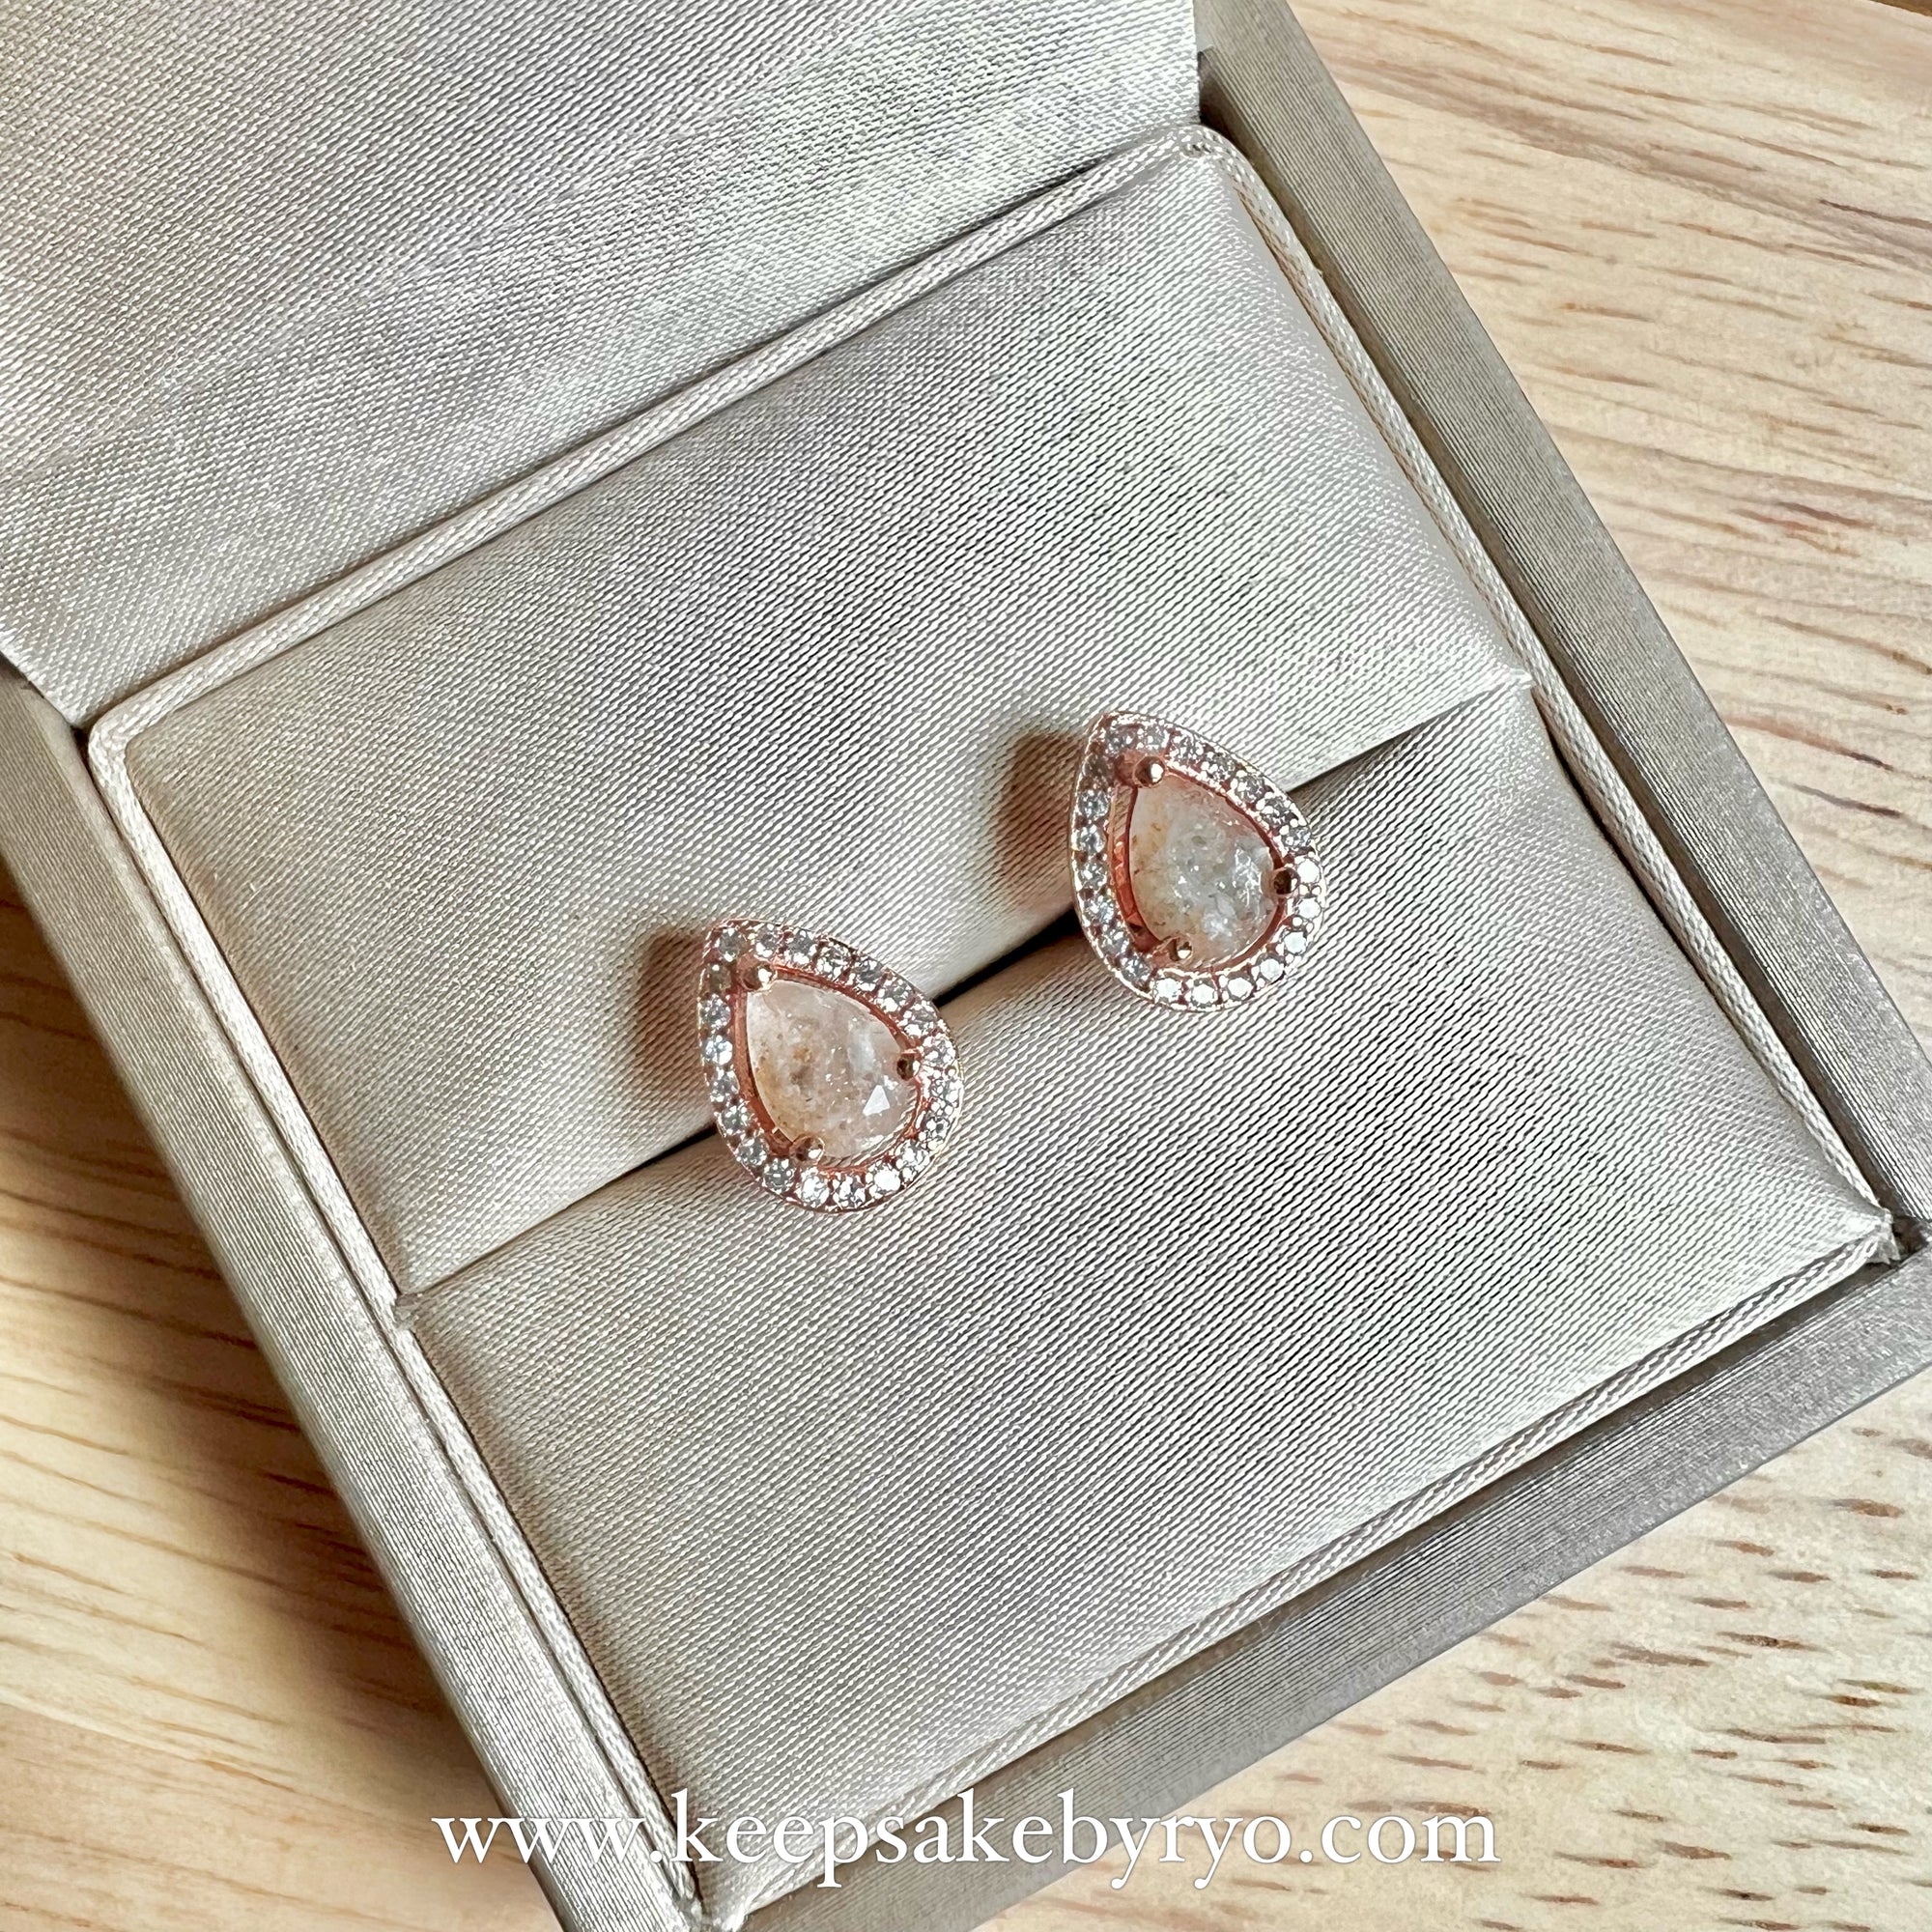 ASHES 925 SOLITAIRE: ARYA STUD EARRINGS WITH TEARDROP INCLUSION STONES